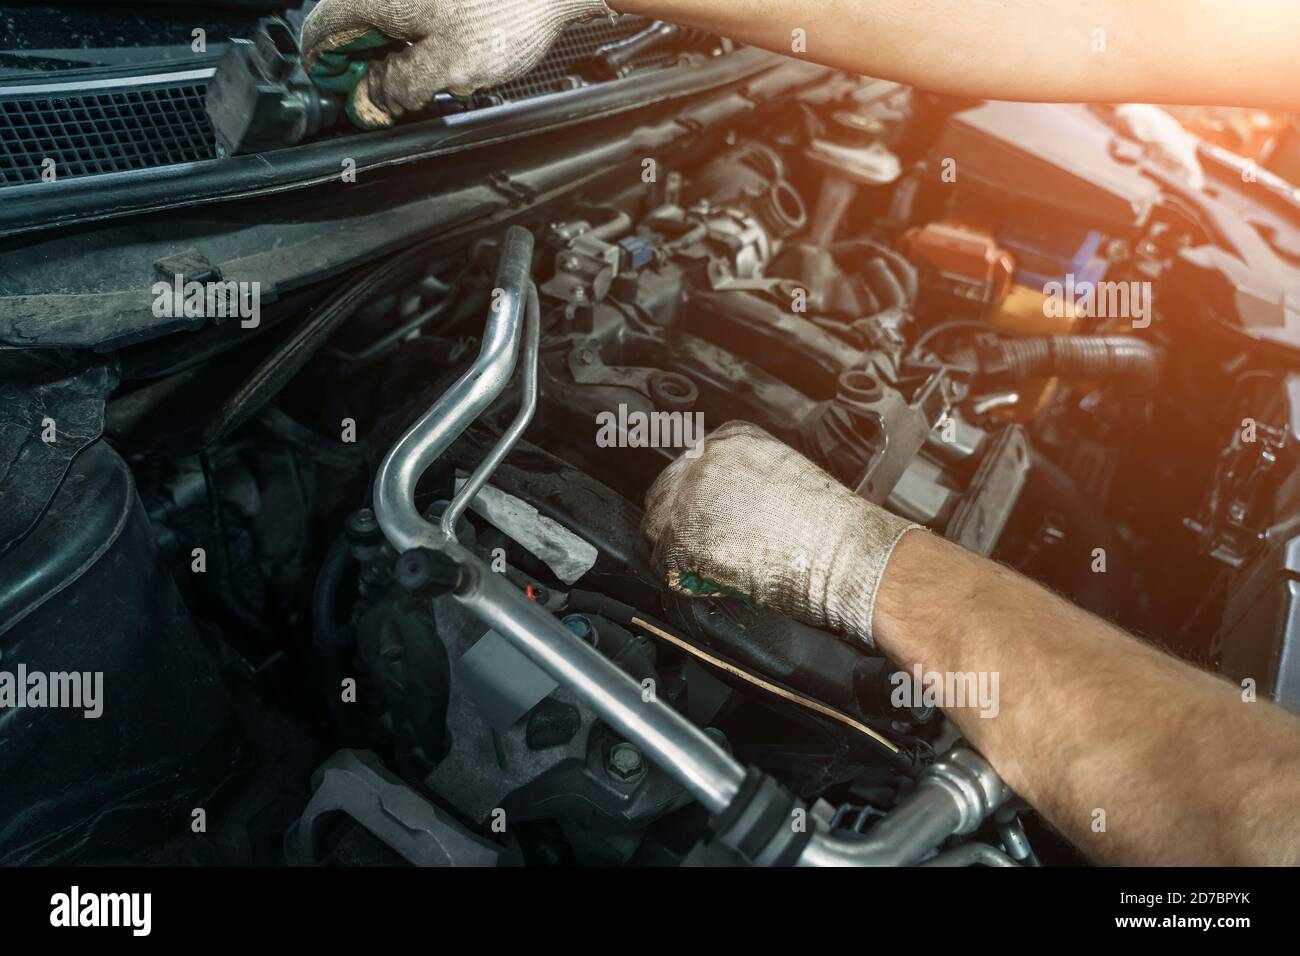 Worker repairing car and changes spark plugs in car engine in auto service, close up. Stock Photo